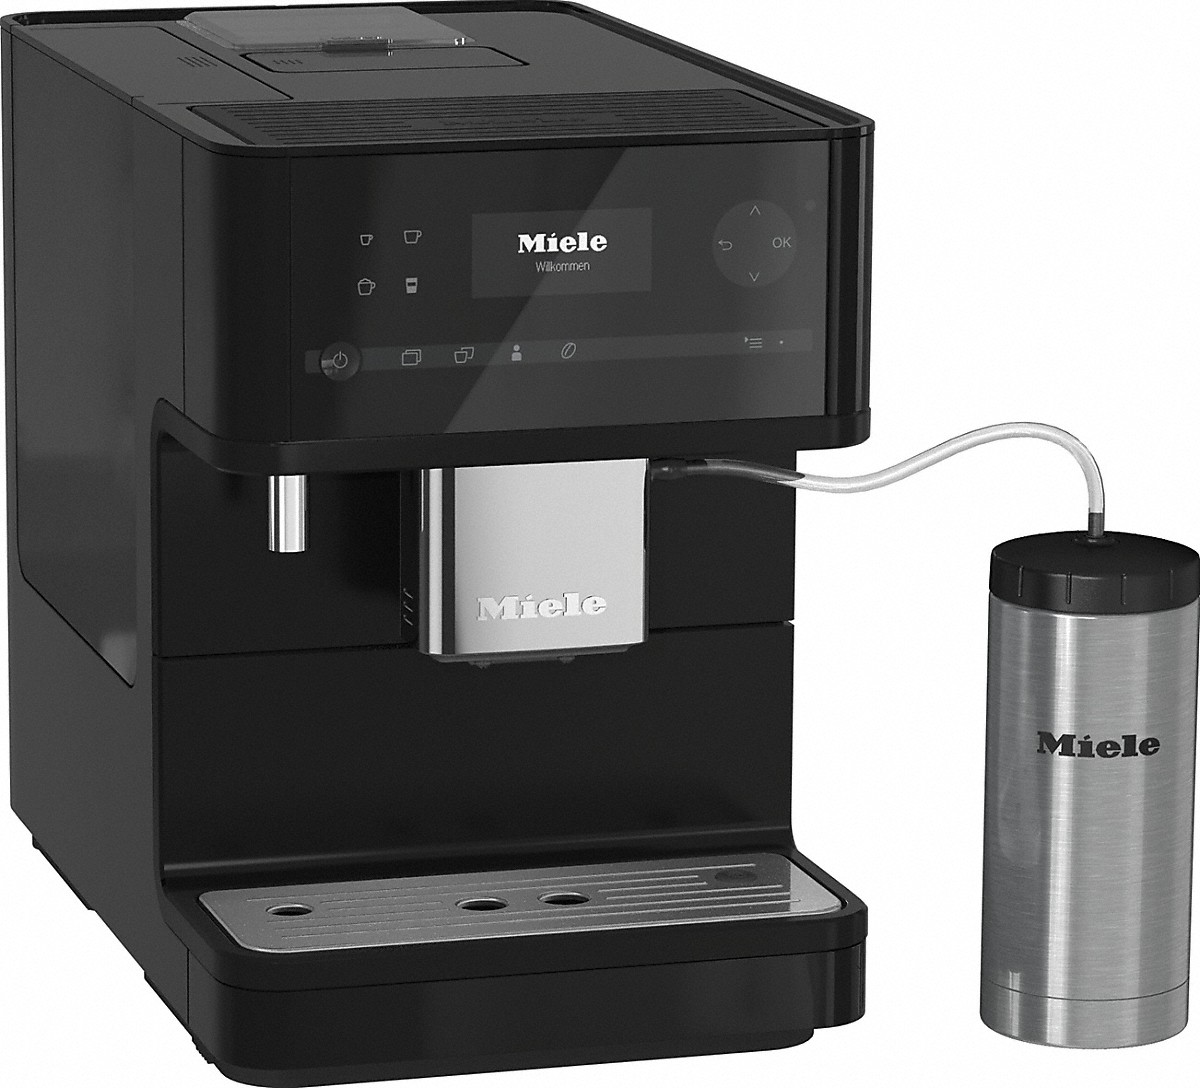 Miele CM 6350 Black Edition, data, comparison, manual, troubleshooting,  repair and member rating at Bean2cup.org